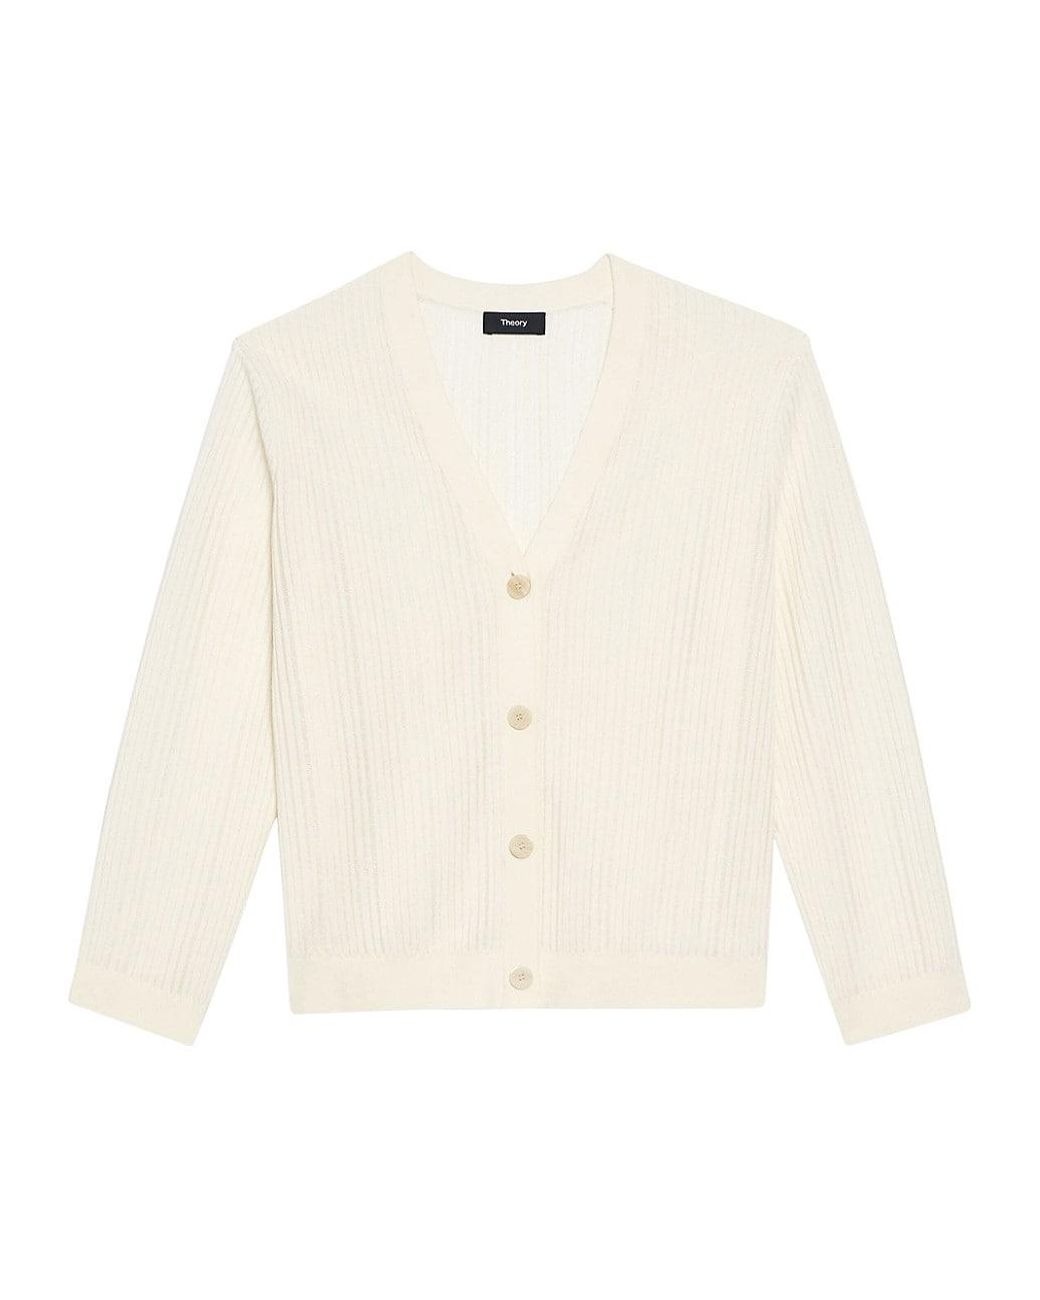 Theory Cotton Shrunken Cardigan in Natural | Lyst